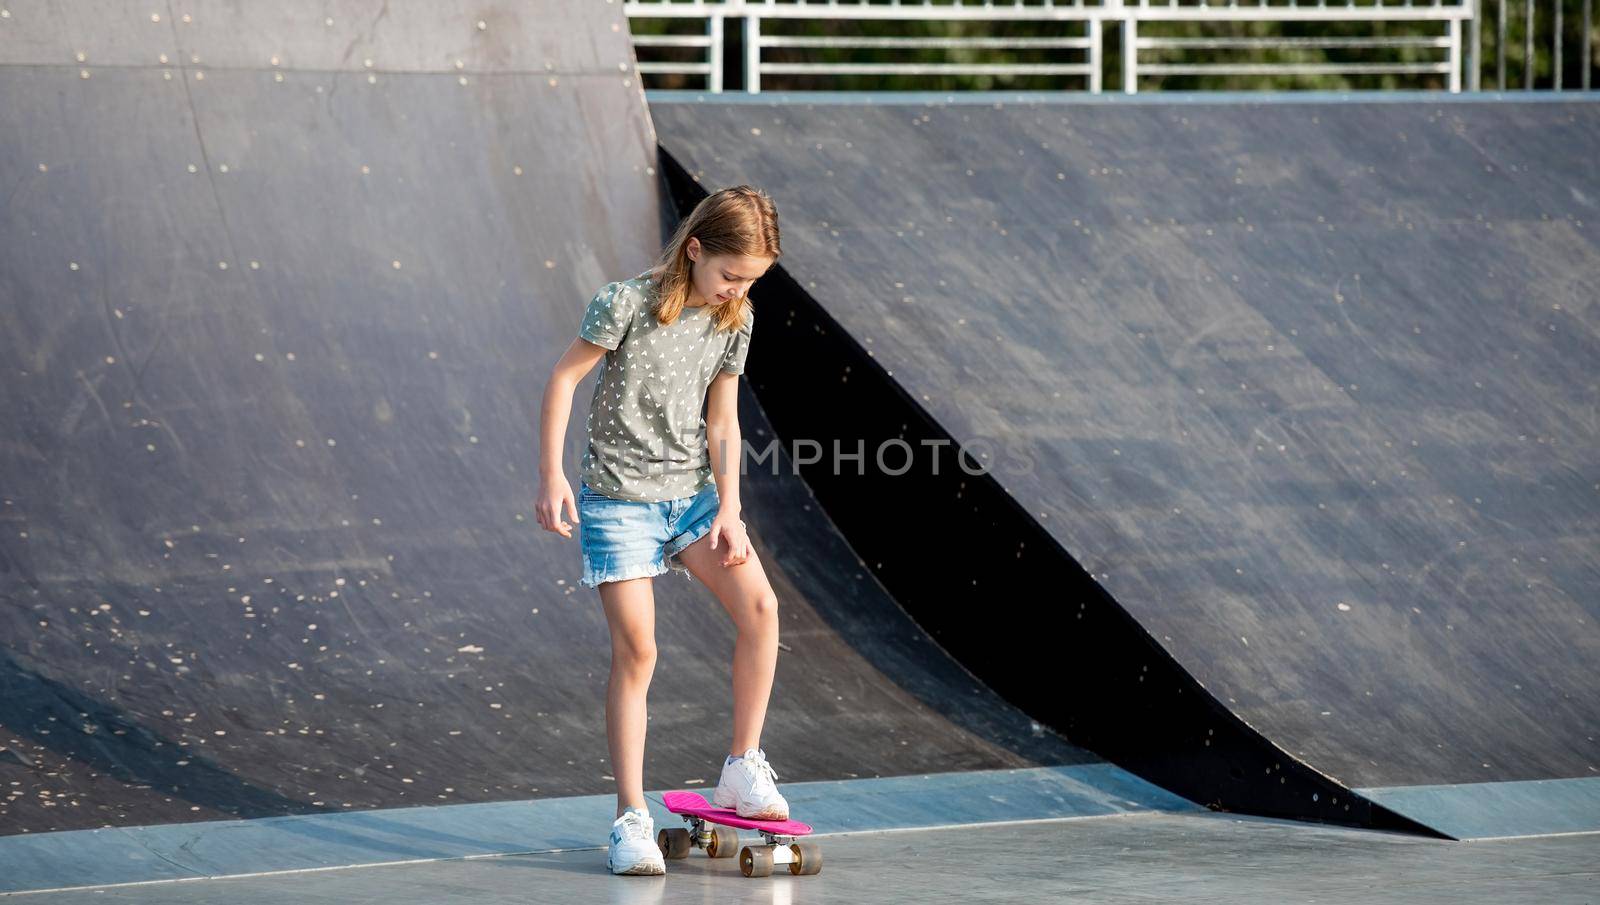 Girl with skateboard outdoors by tan4ikk1